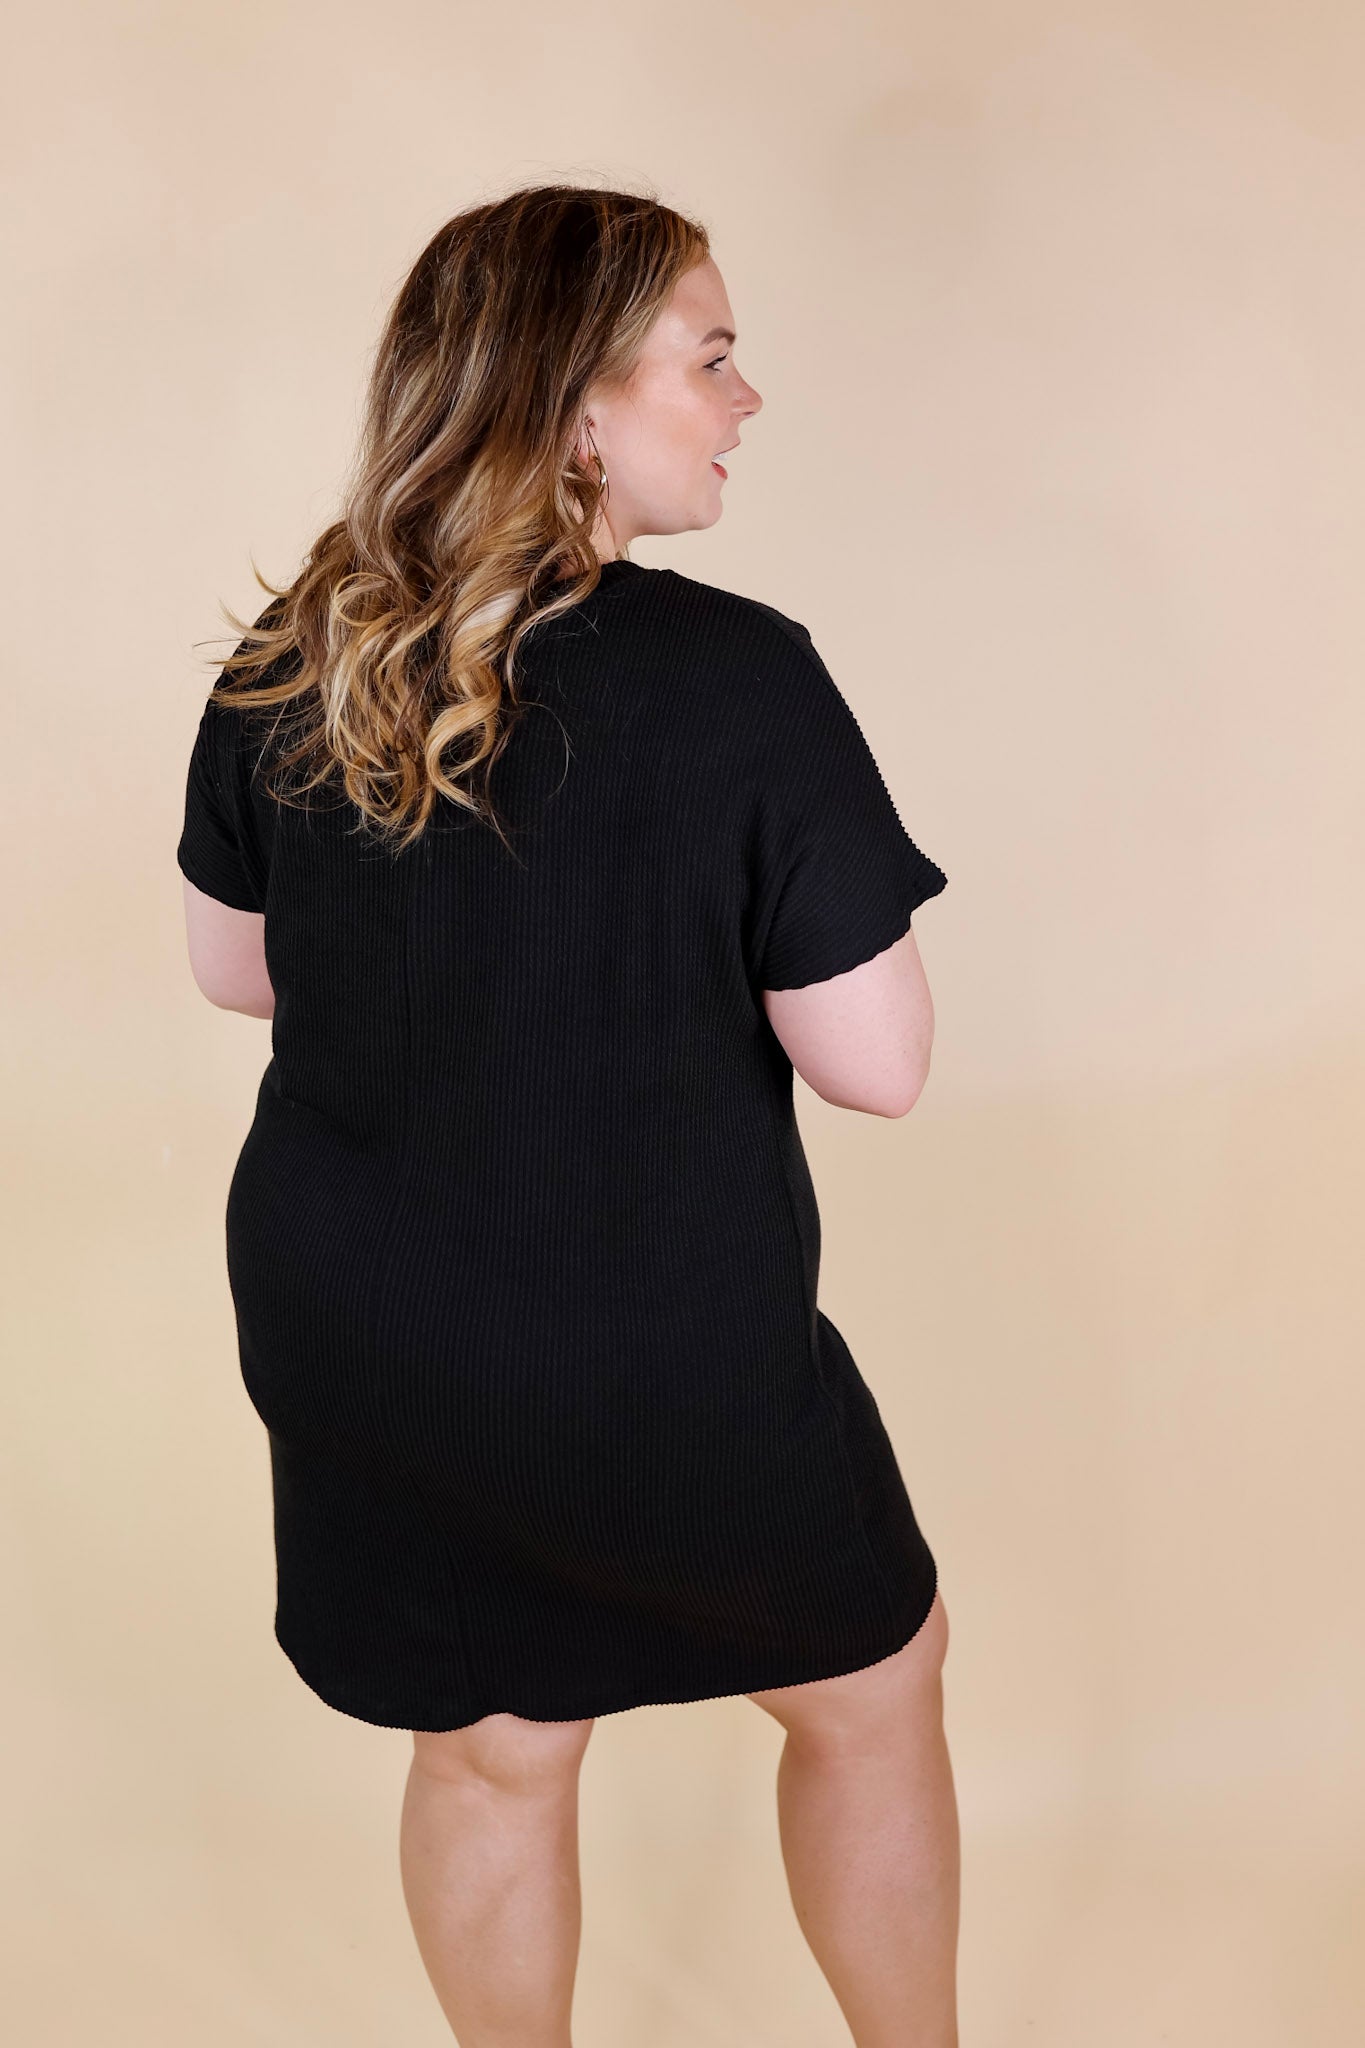 Coffee and Carefree Ribbed Short Sleeve Dress with Front Pocket in Black - Giddy Up Glamour Boutique